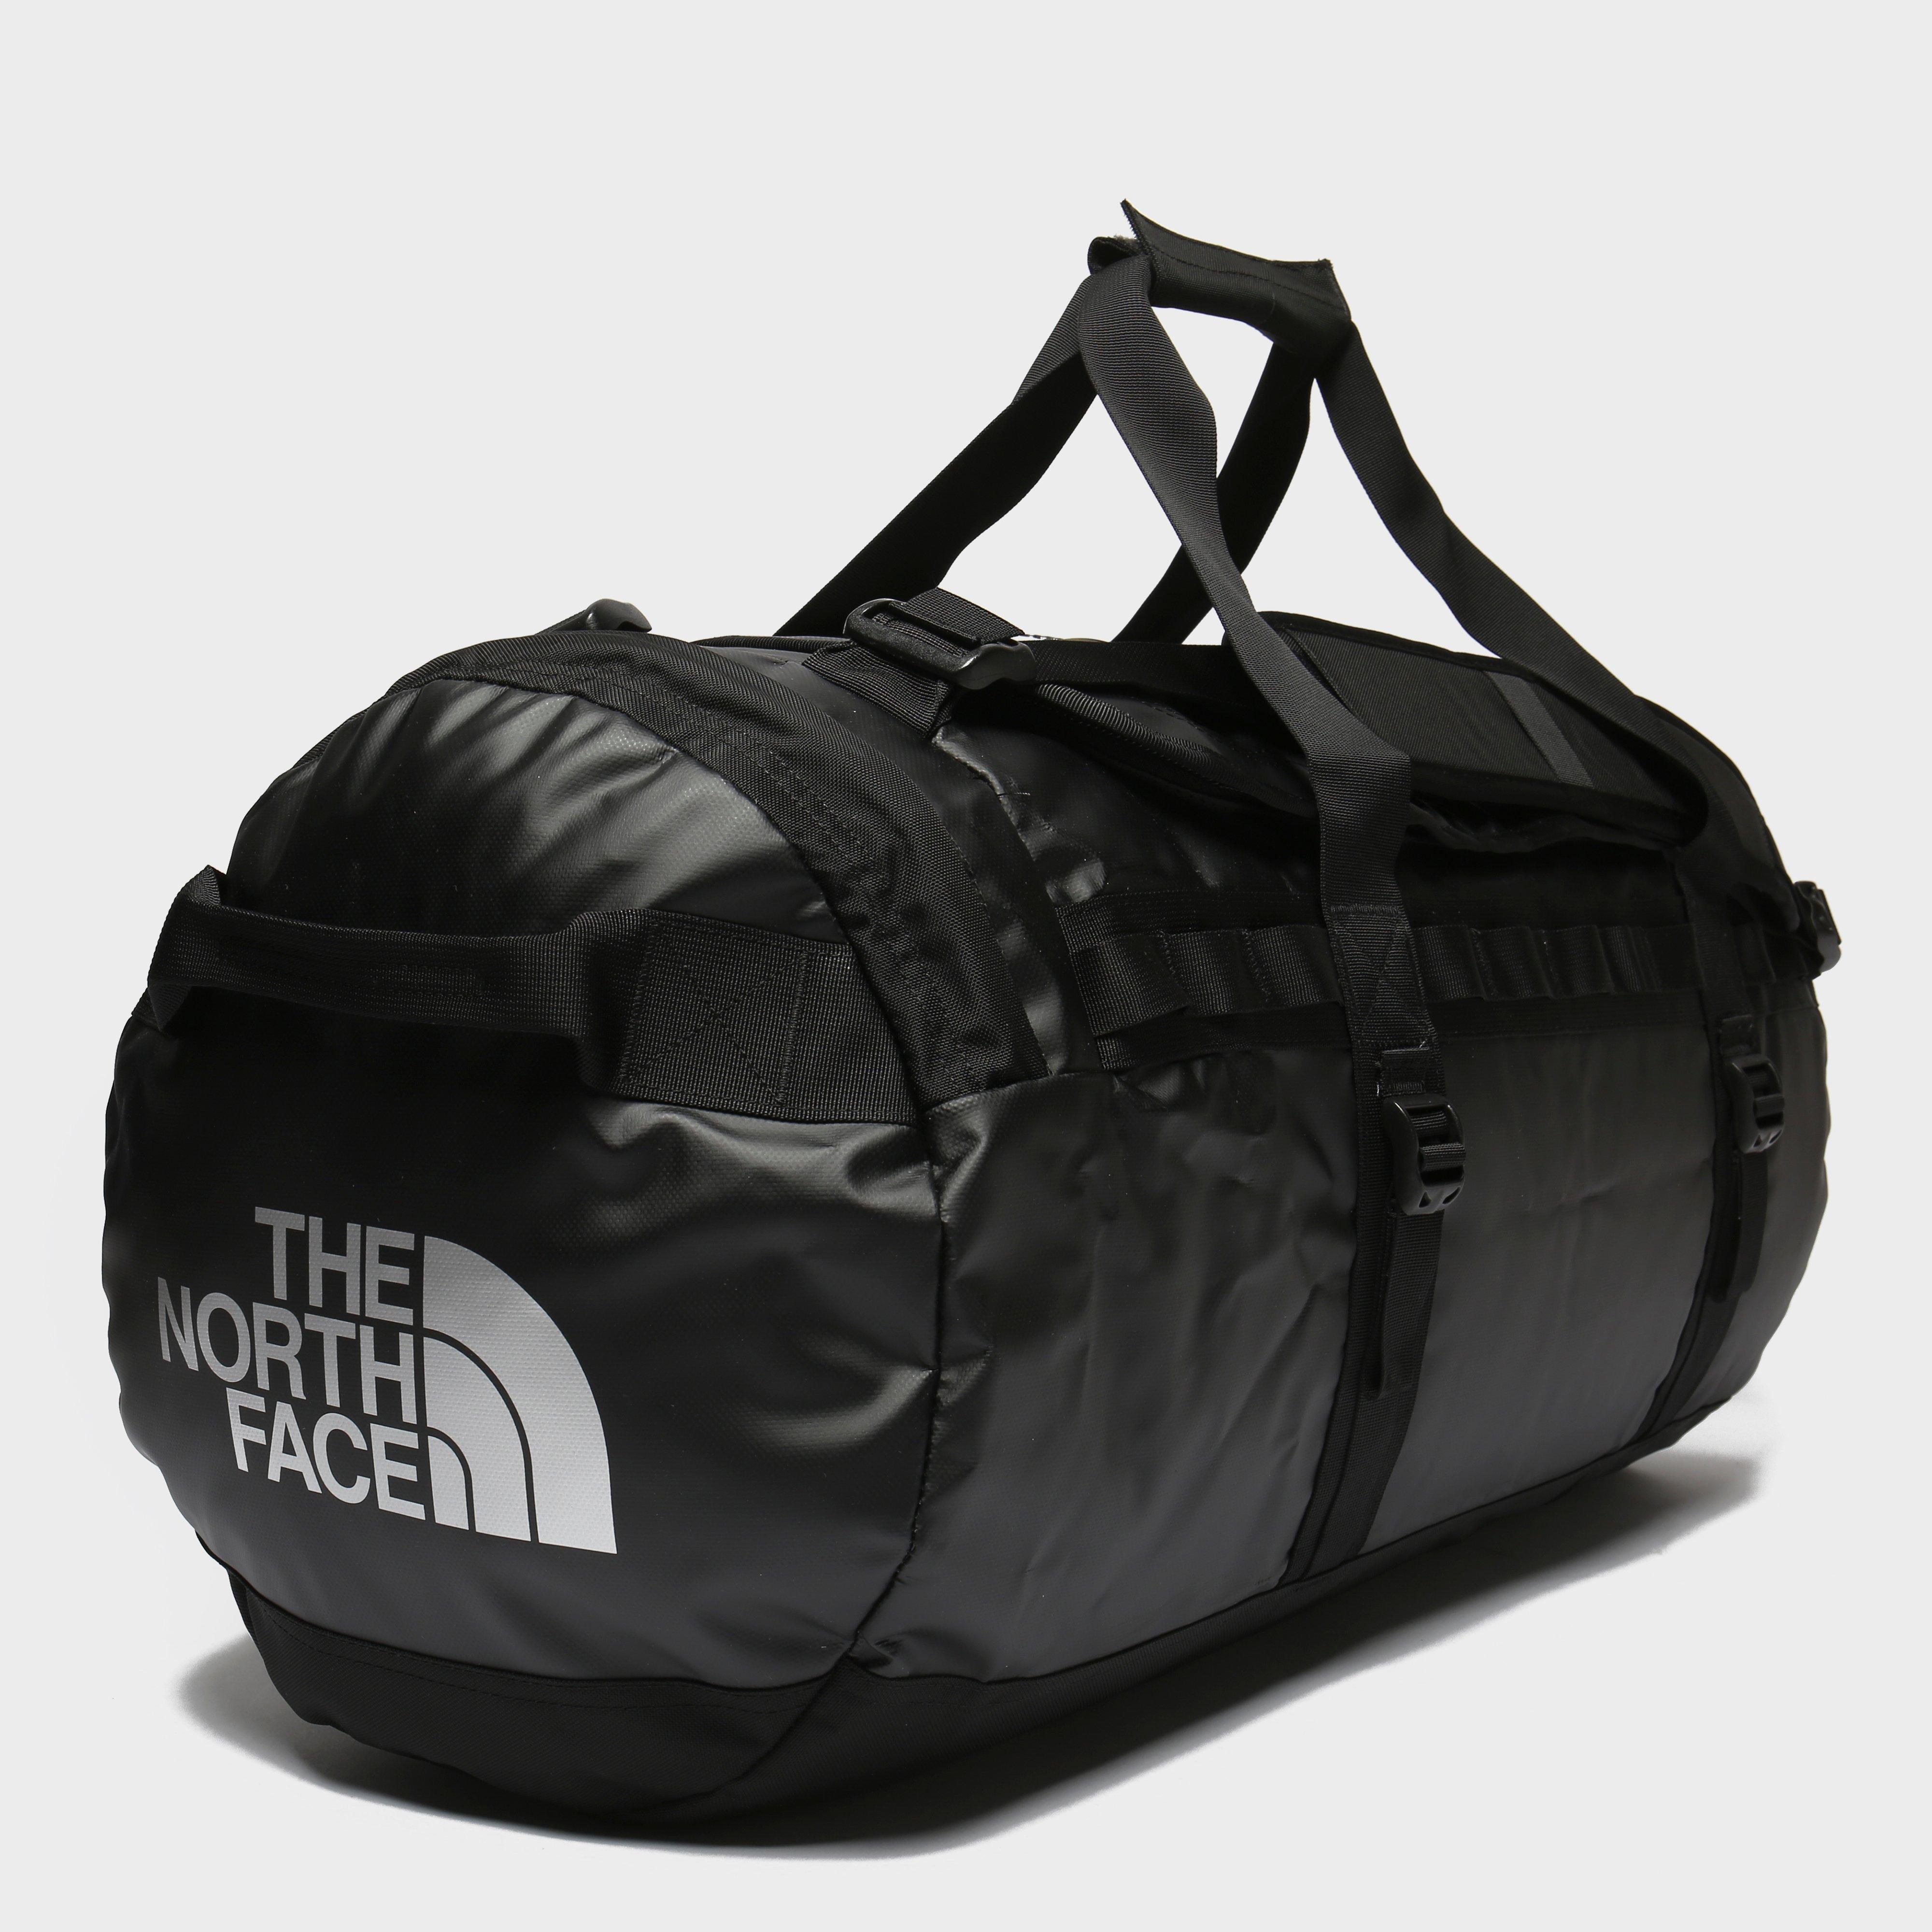 the north face duffel bag